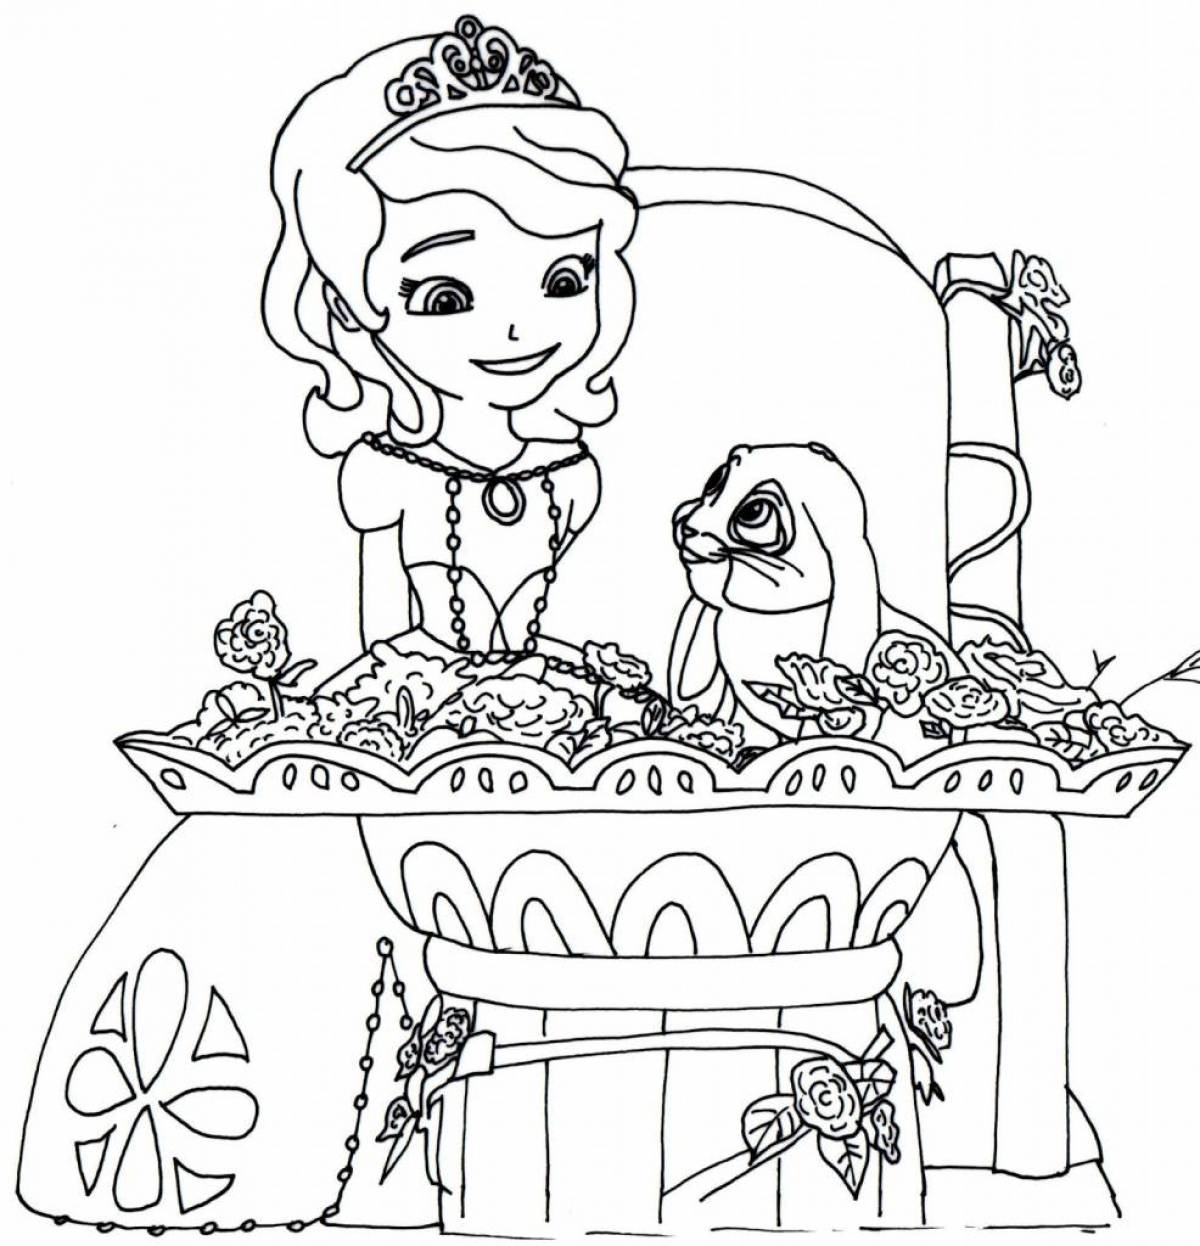 Luxury princess coloring book for girls